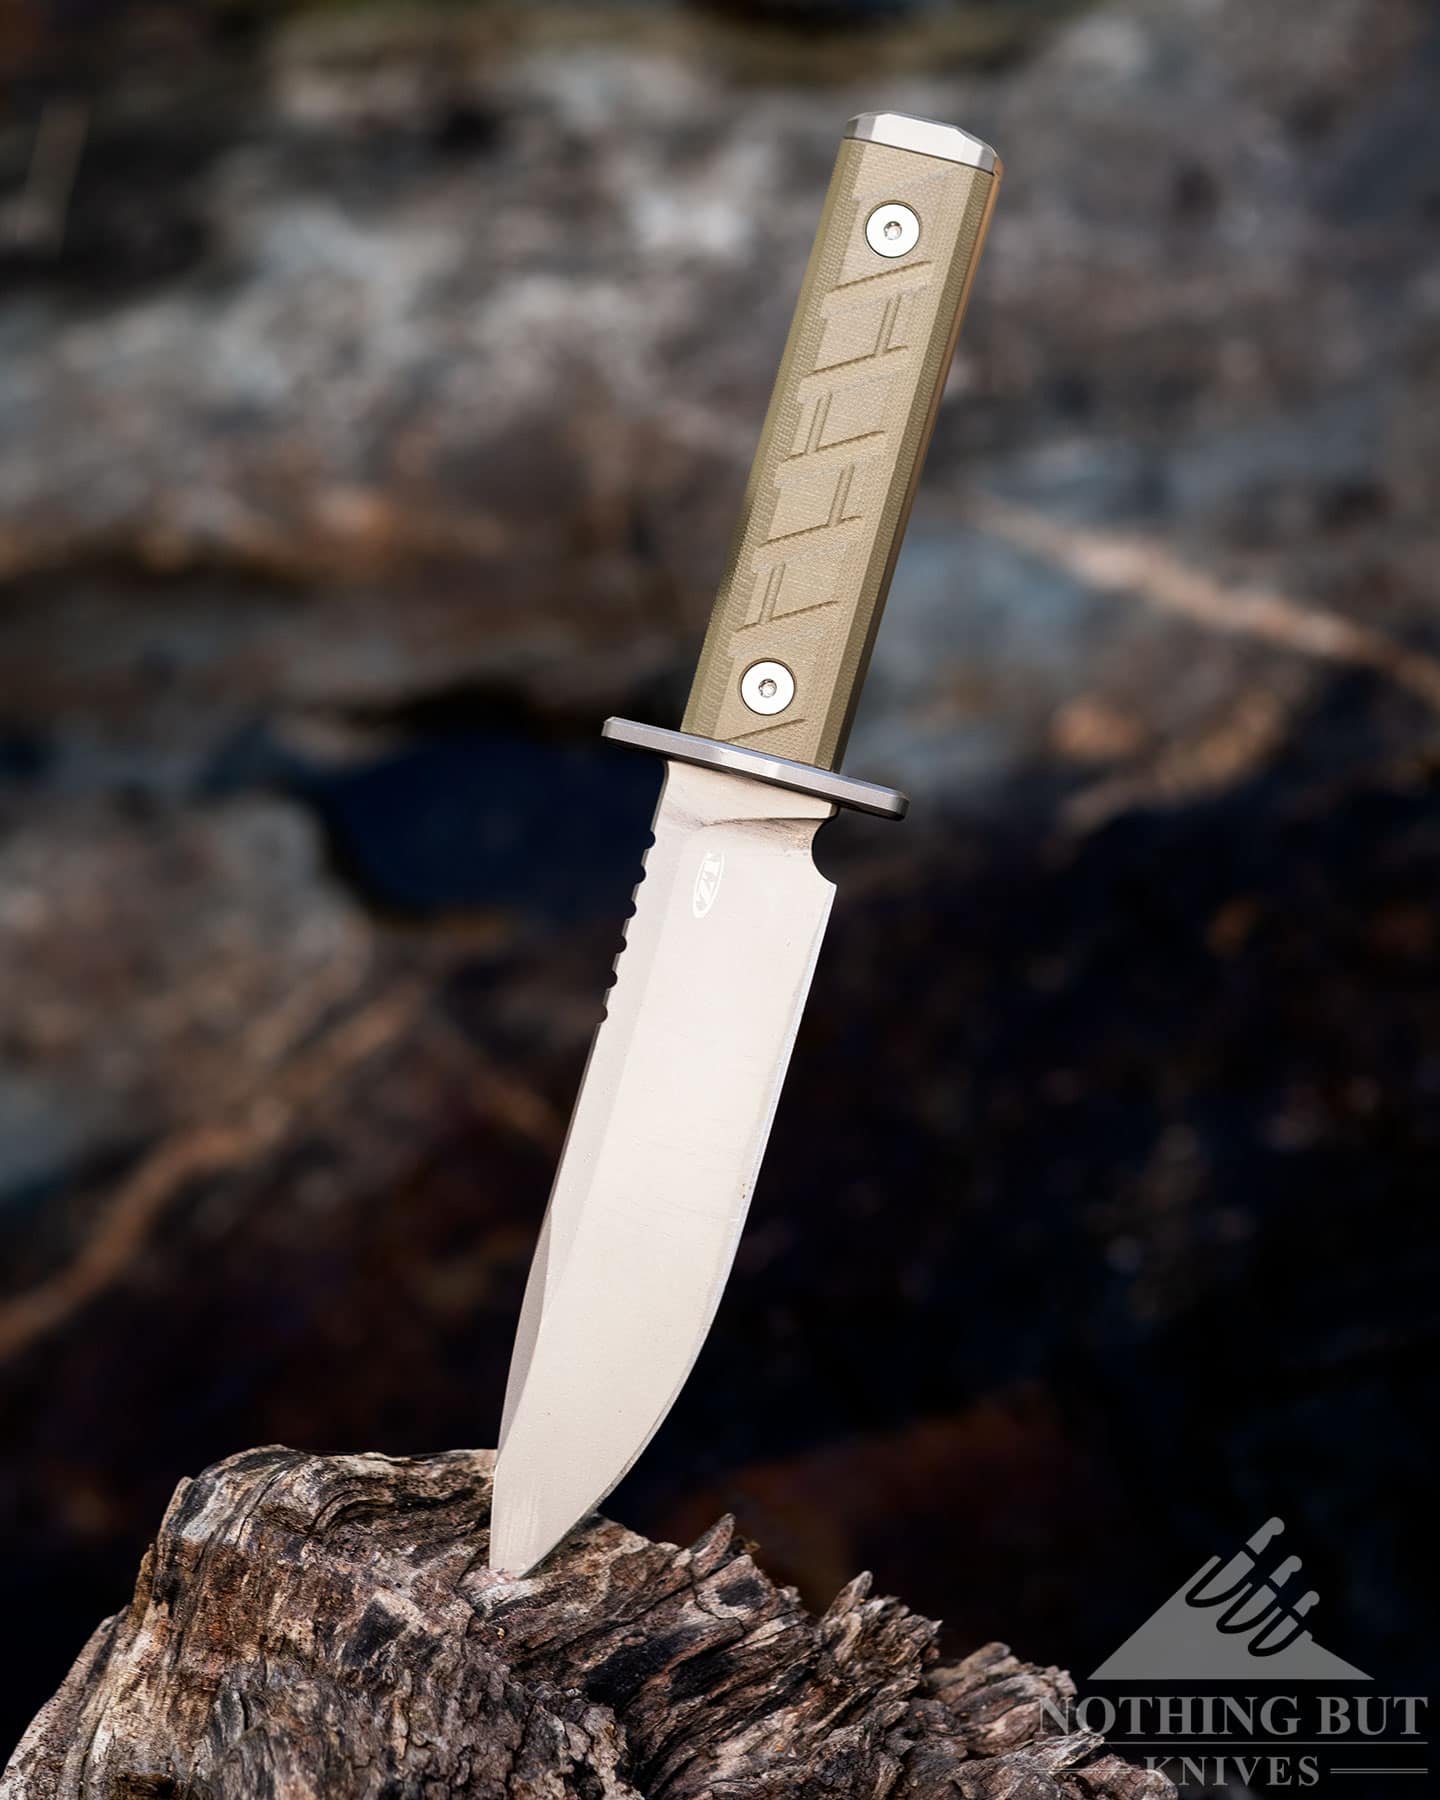 The Zero Tolerance 0006 survival knife sticking out of a large piece of driftwood.